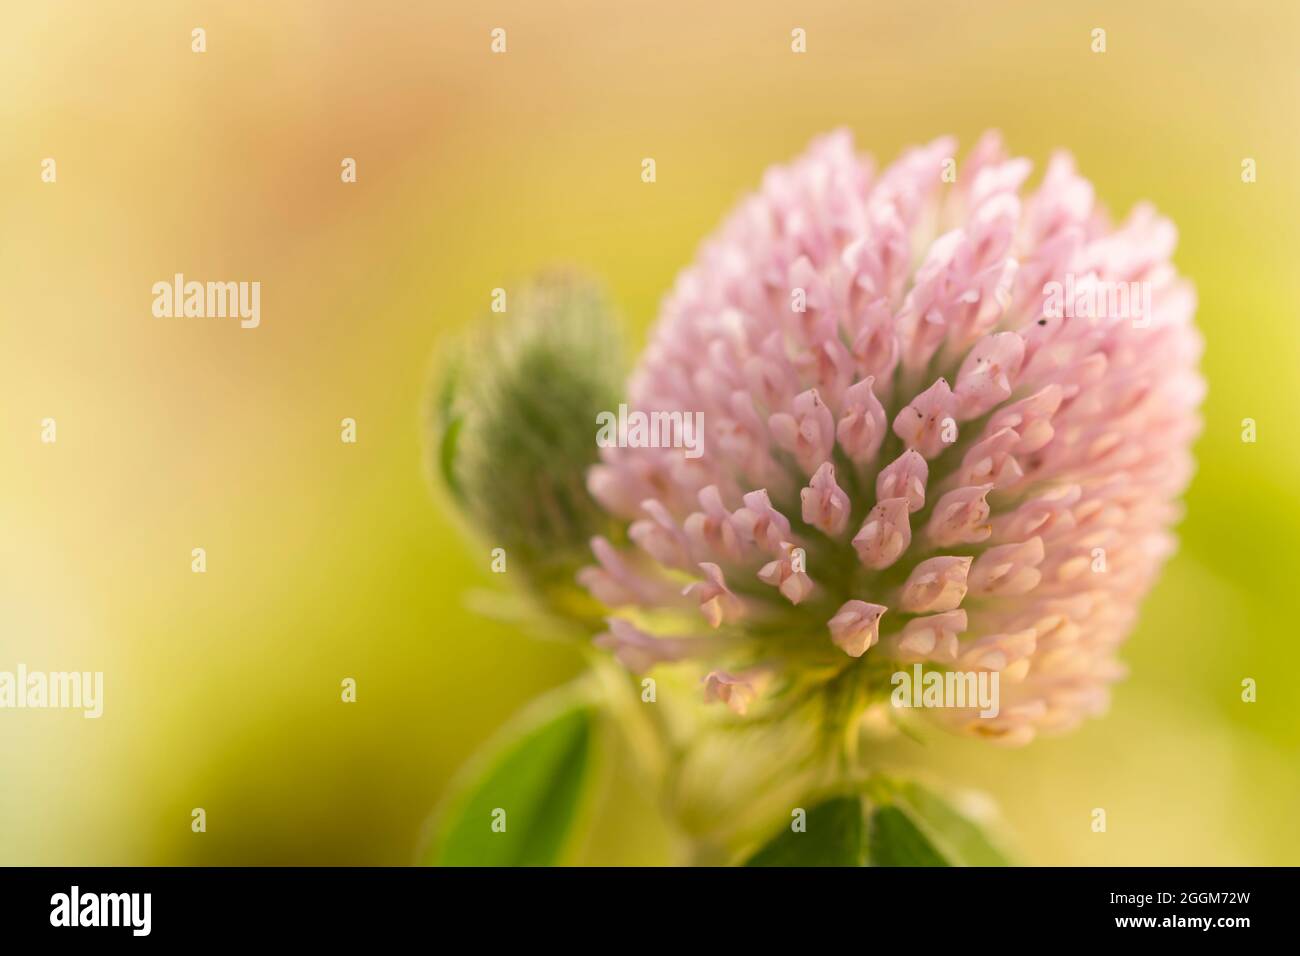 Extreme CloseUp of a clover flower Stock Photo